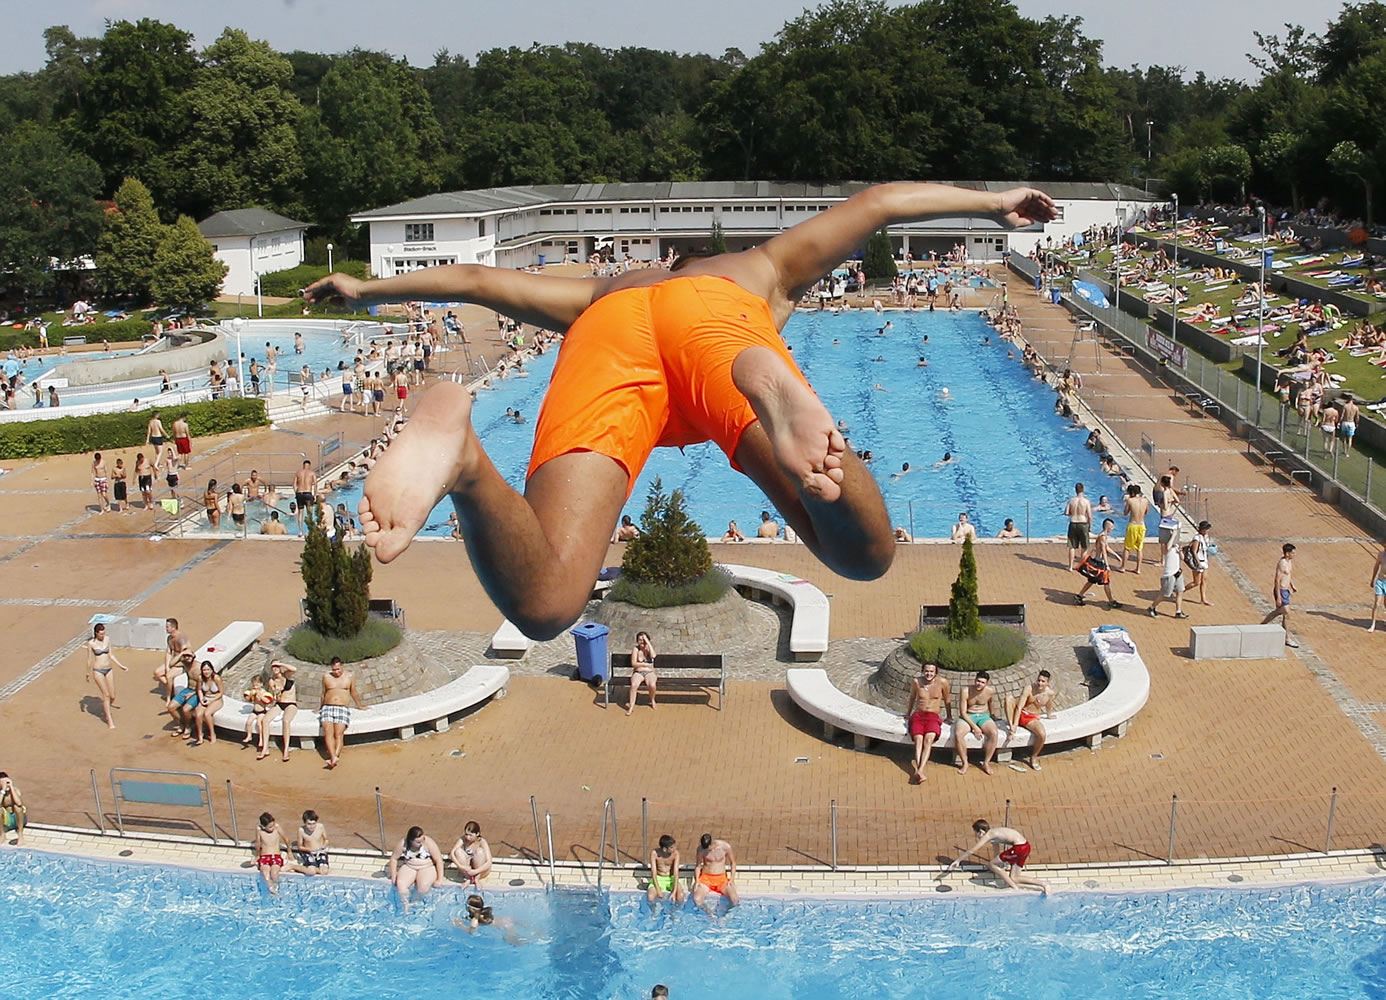 A boy jumps from a 7.5-meter platform into a pool Friday in Frankfurt, Germany.